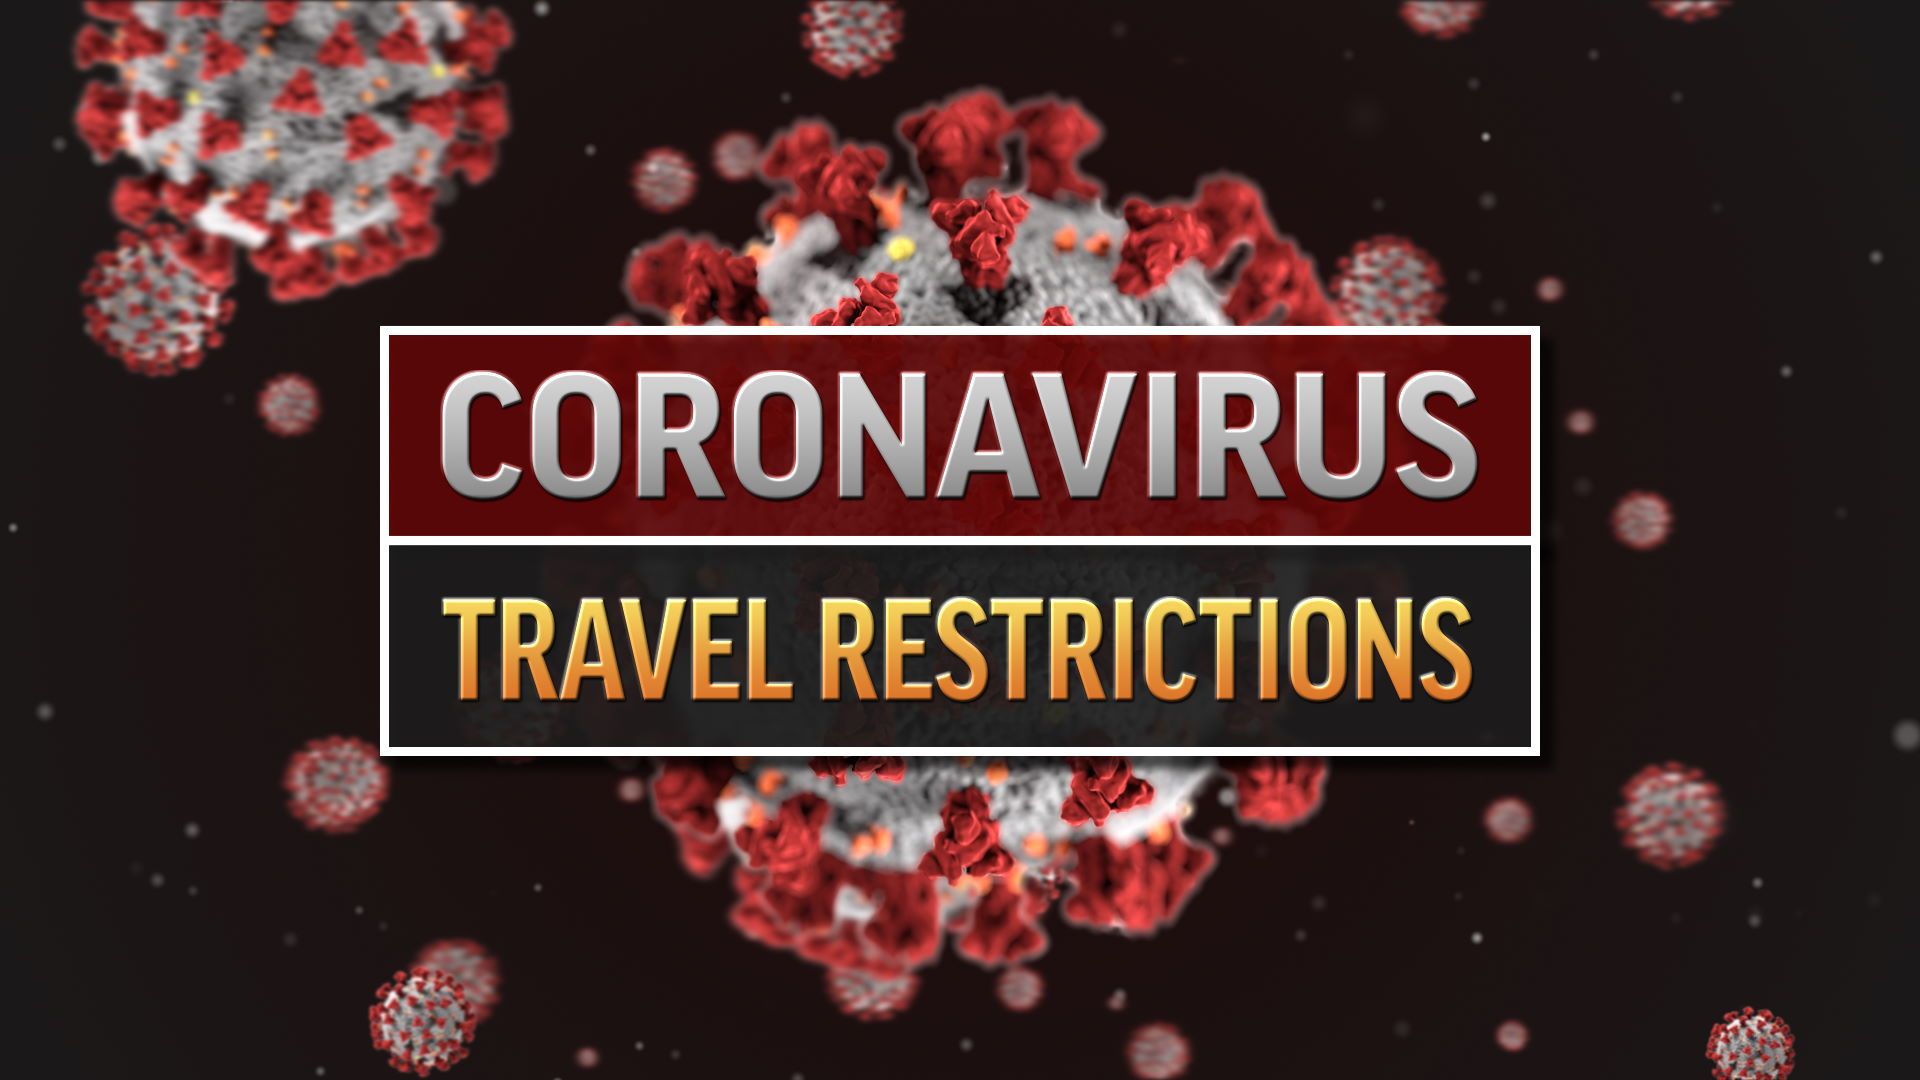 Indiana governor orders residents to stay home due to coronavirus